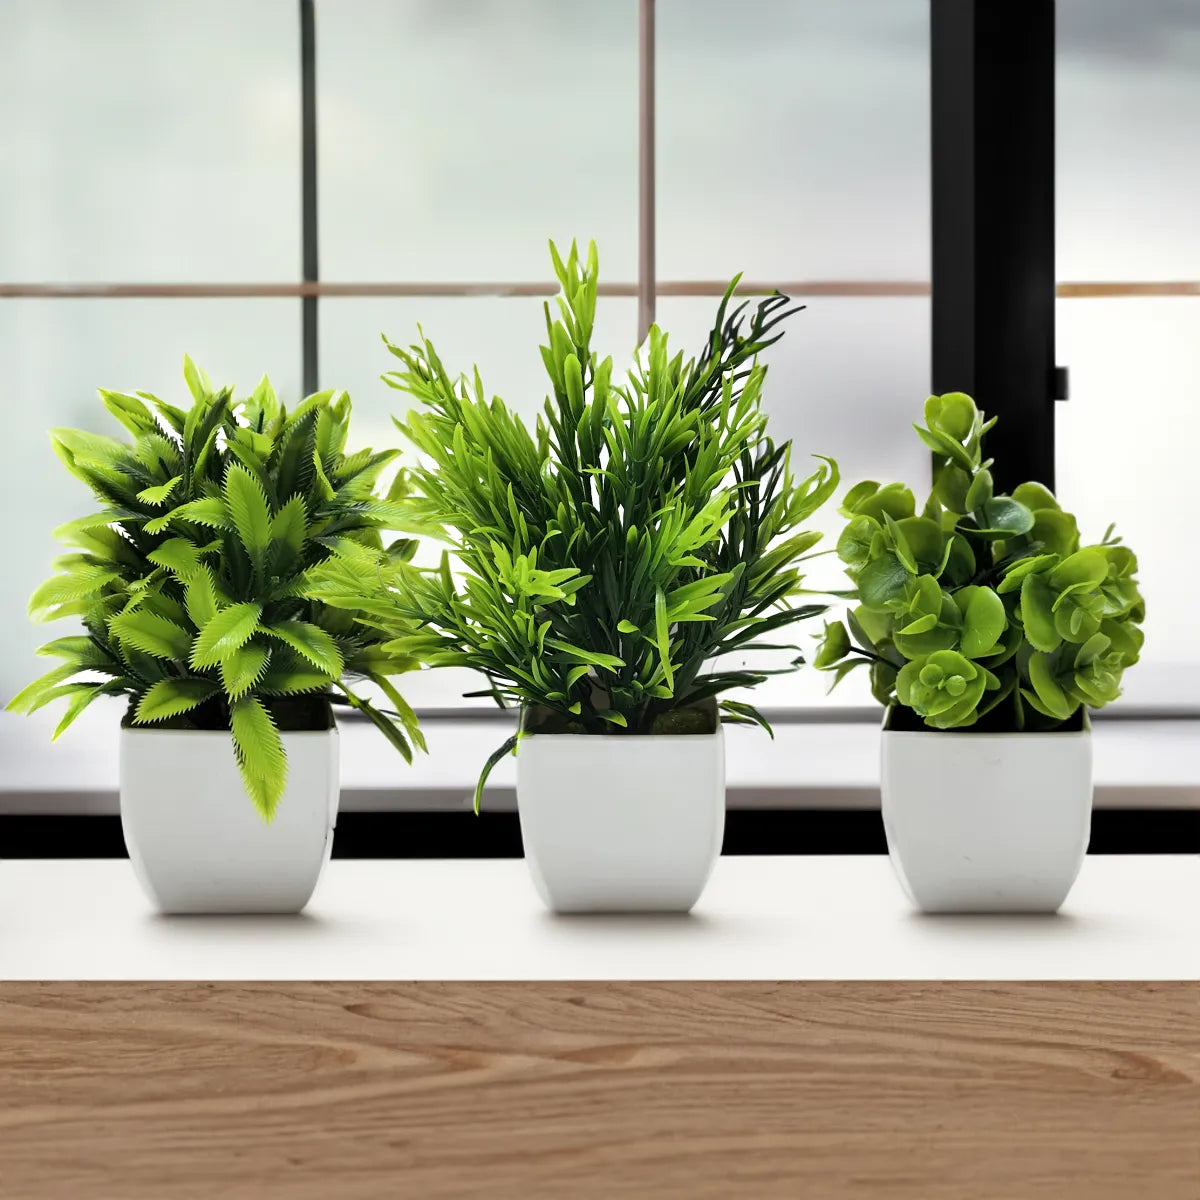 Tree Window Sill Office Table Desktop Decoration Plastic Garden Fake Plant Potted Home Decor